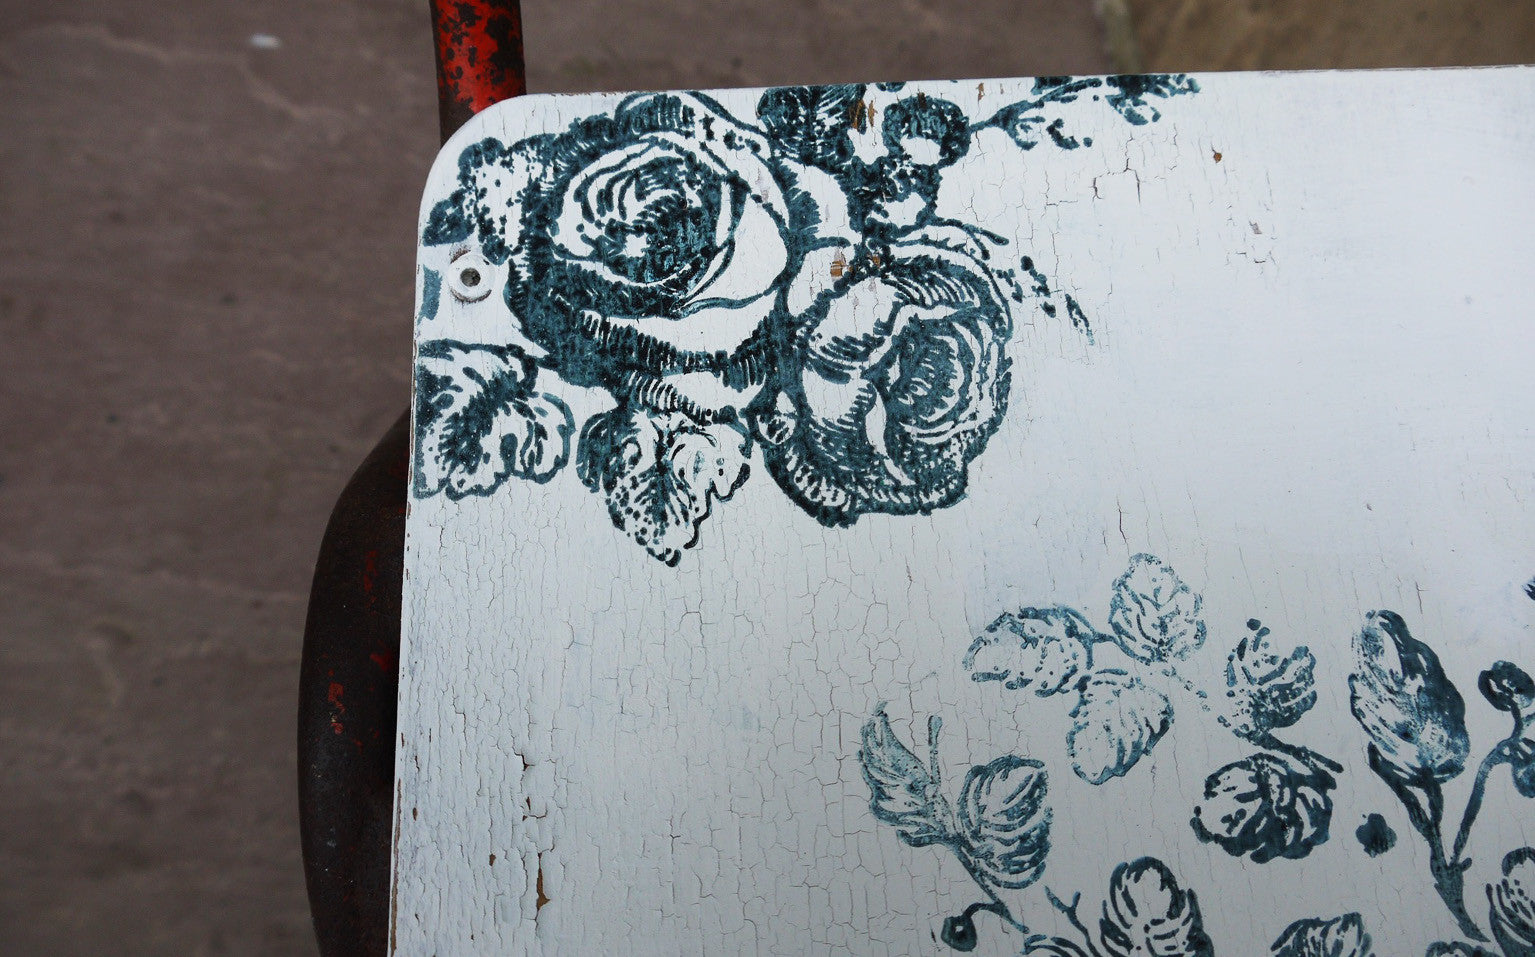 Vintage children's school chair painted in Miss Mustard Seed Milk Paint with blue  rose design